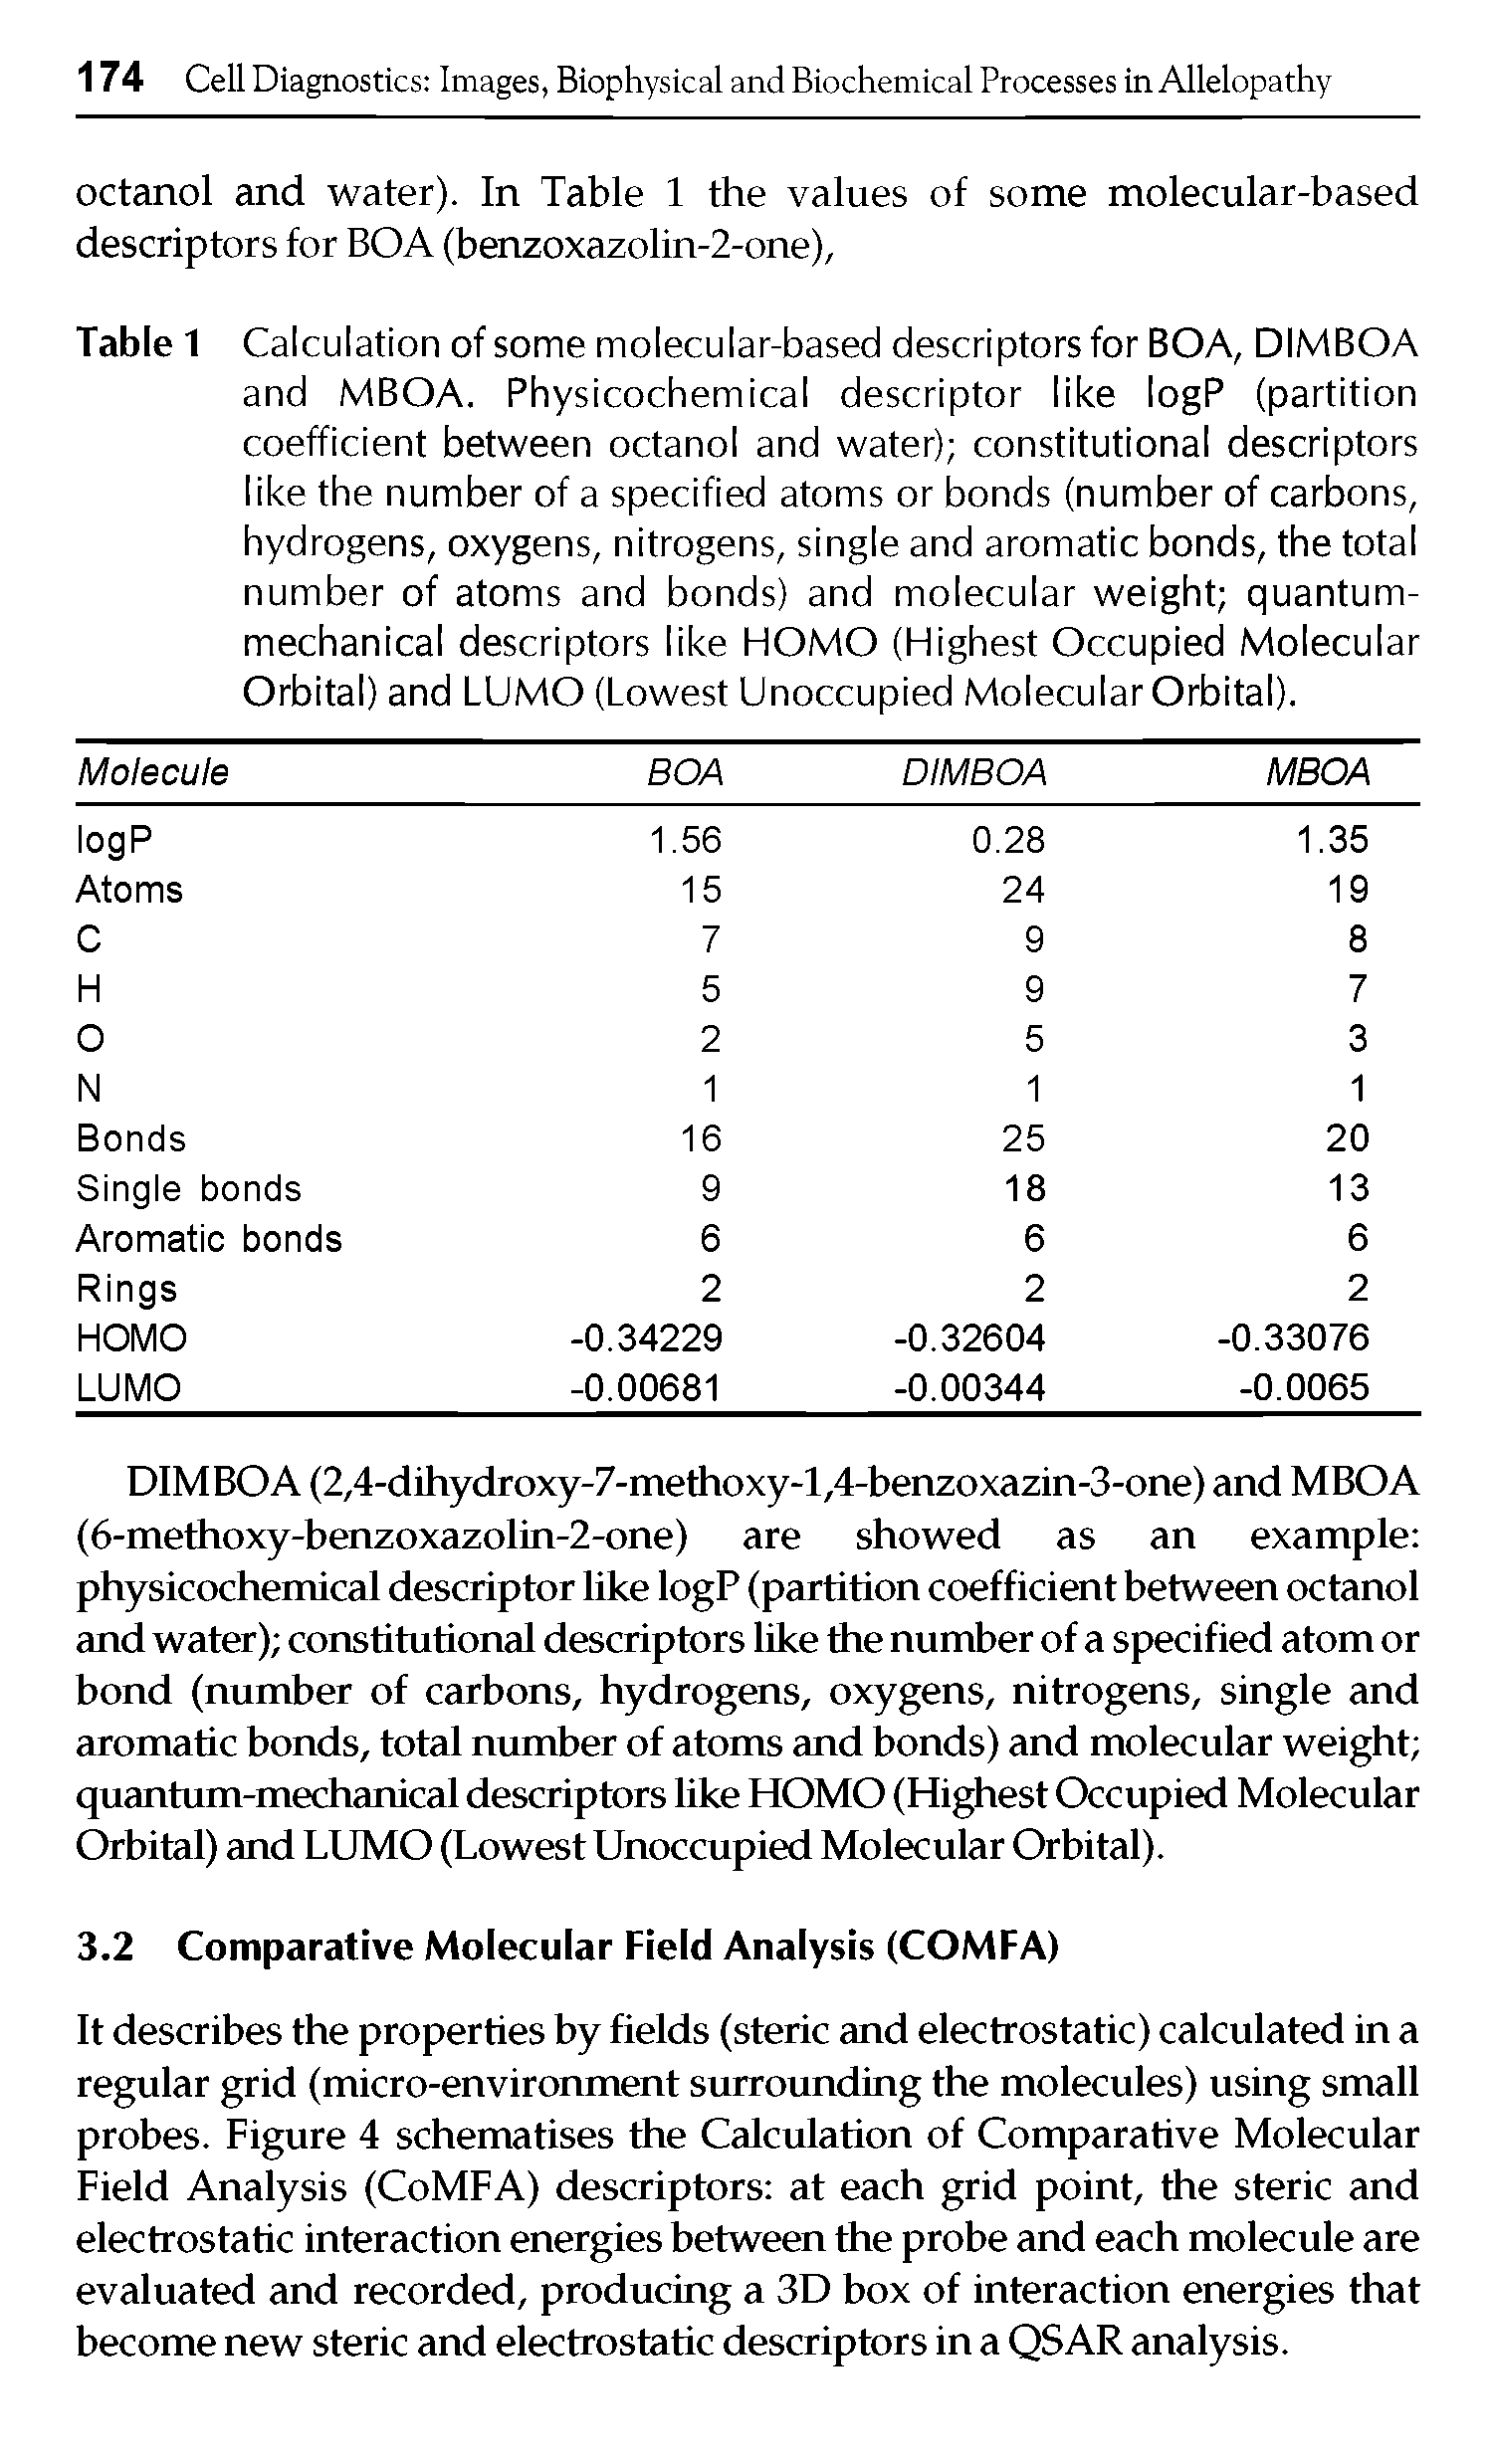 Table 1 Calculation of some molecular-based descriptors for BOA, DIMBOA and MBOA. Physicochemical descriptor like logP (partition coefficient between octanol and water) constitutional descriptors like the number of a specified atoms or bonds (number of carbons, hydrogens, oxygens, nitrogens, single and aromatic bonds, the total number of atoms and bonds) and molecular weight quantum-mechanical descriptors like HOMO (Highest Occupied Molecular Orbital) and LUMO (Lowest Unoccupied Molecular Orbital).